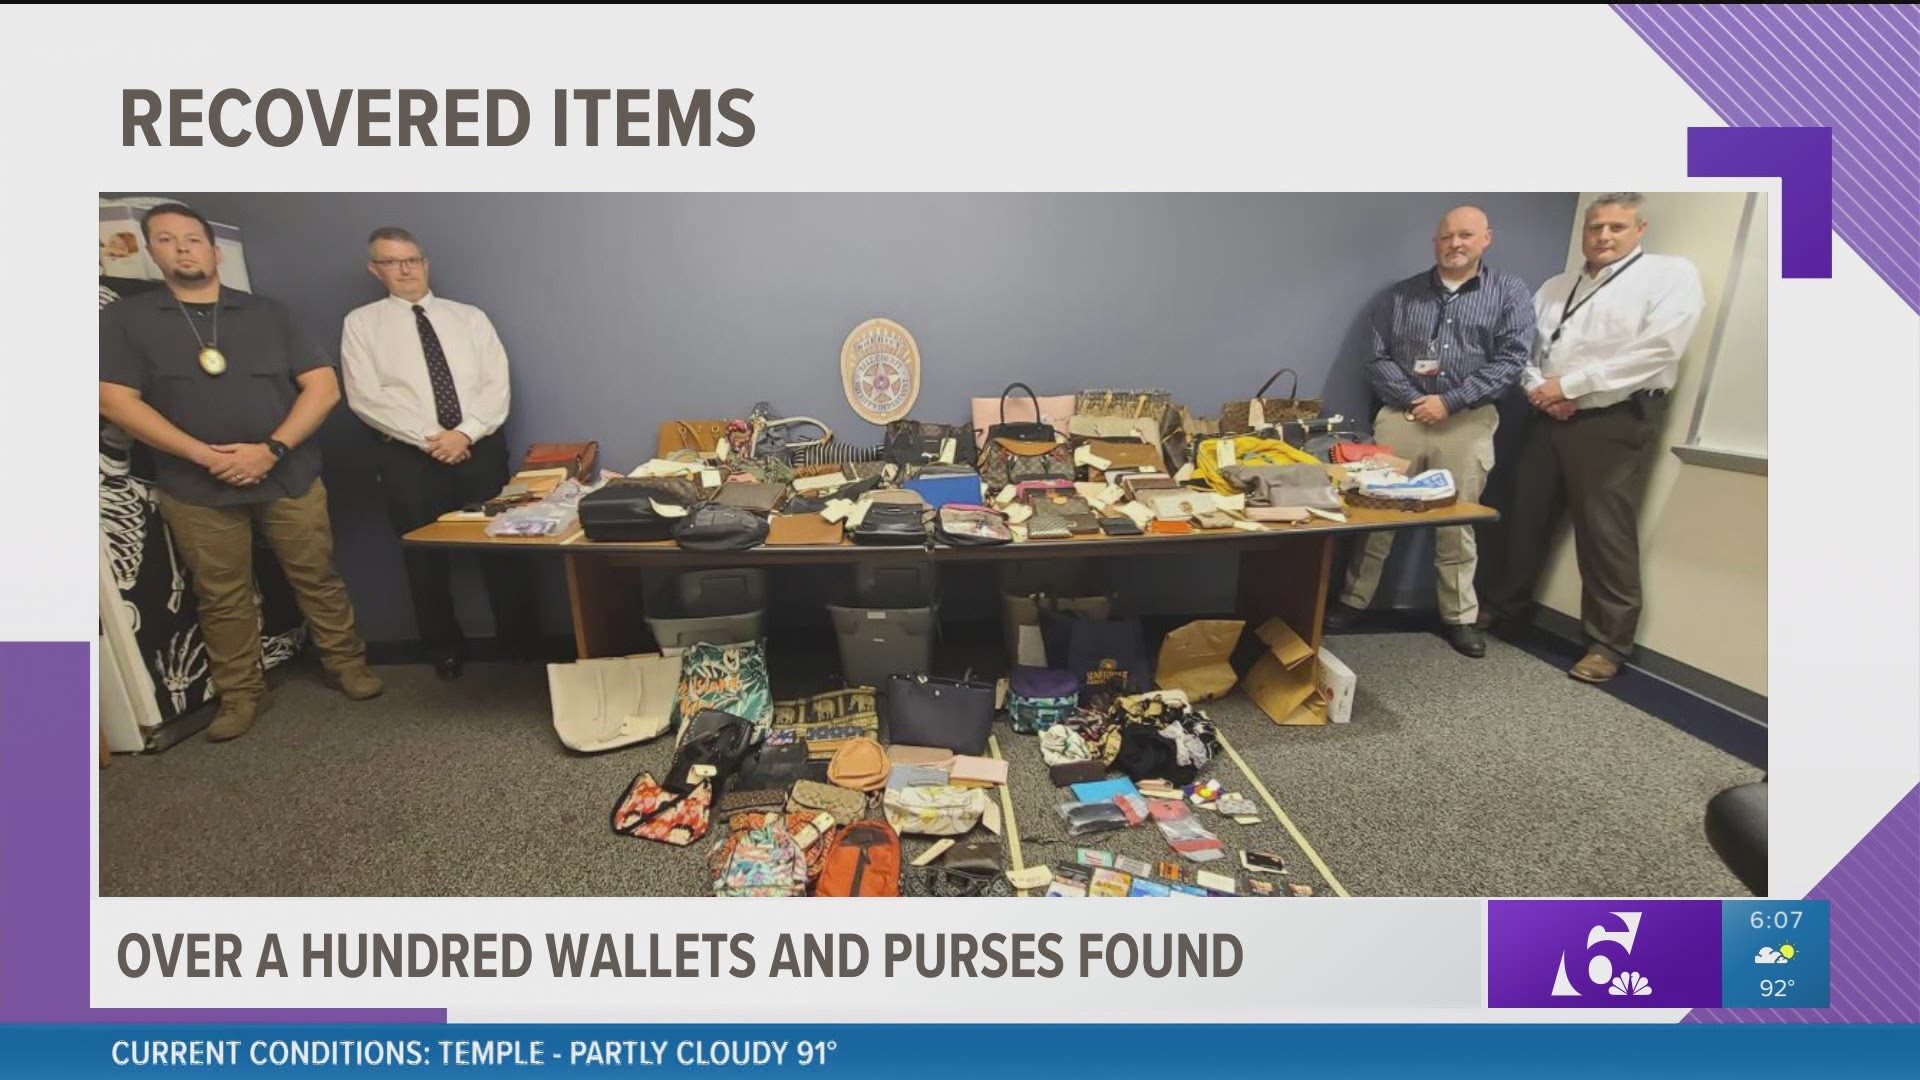 The Bell County Sheriff's Department said they found more than 100 purses and wallets stolen from vehicles across three counties.